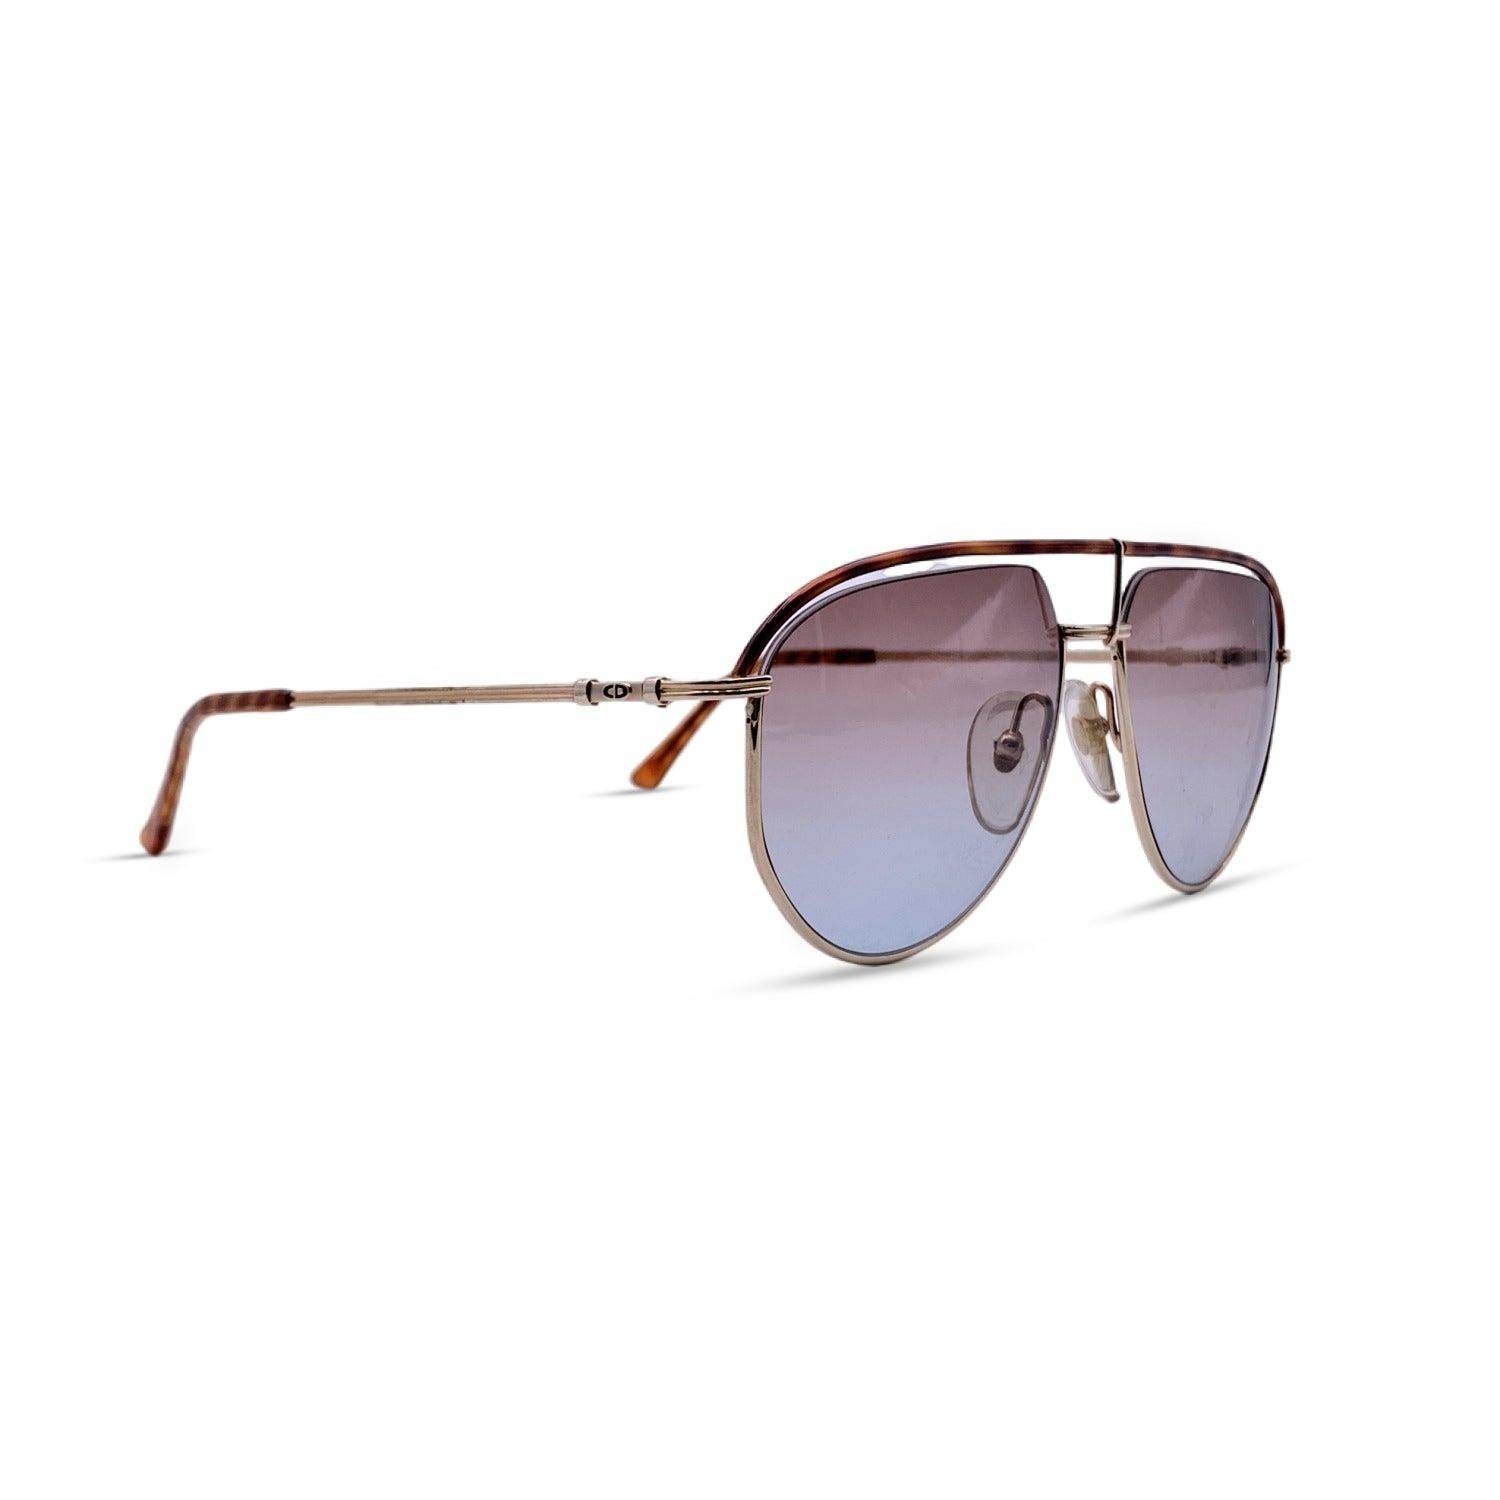 Christian Dior Vintage Unisex Aviator Sunglasses 2582 41 56/16 135mm In Excellent Condition For Sale In Rome, Rome